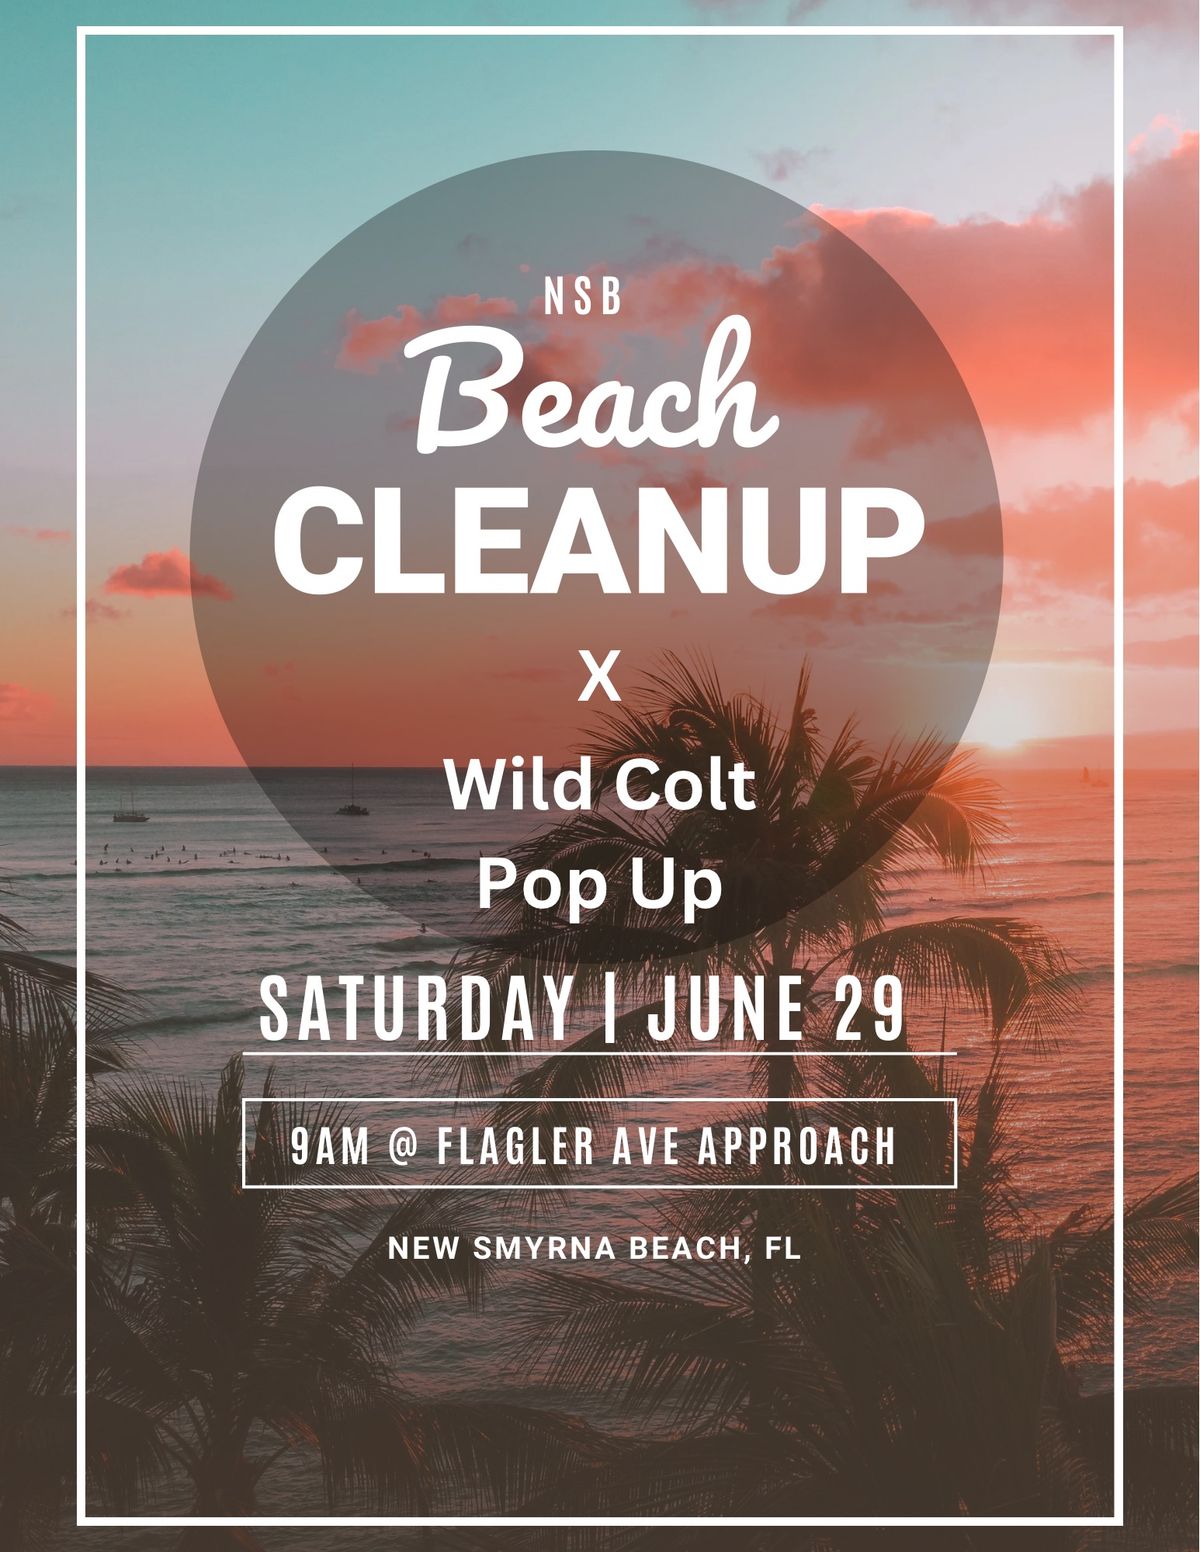 Beach Cleanup and Wild Colt Pop-up Shop